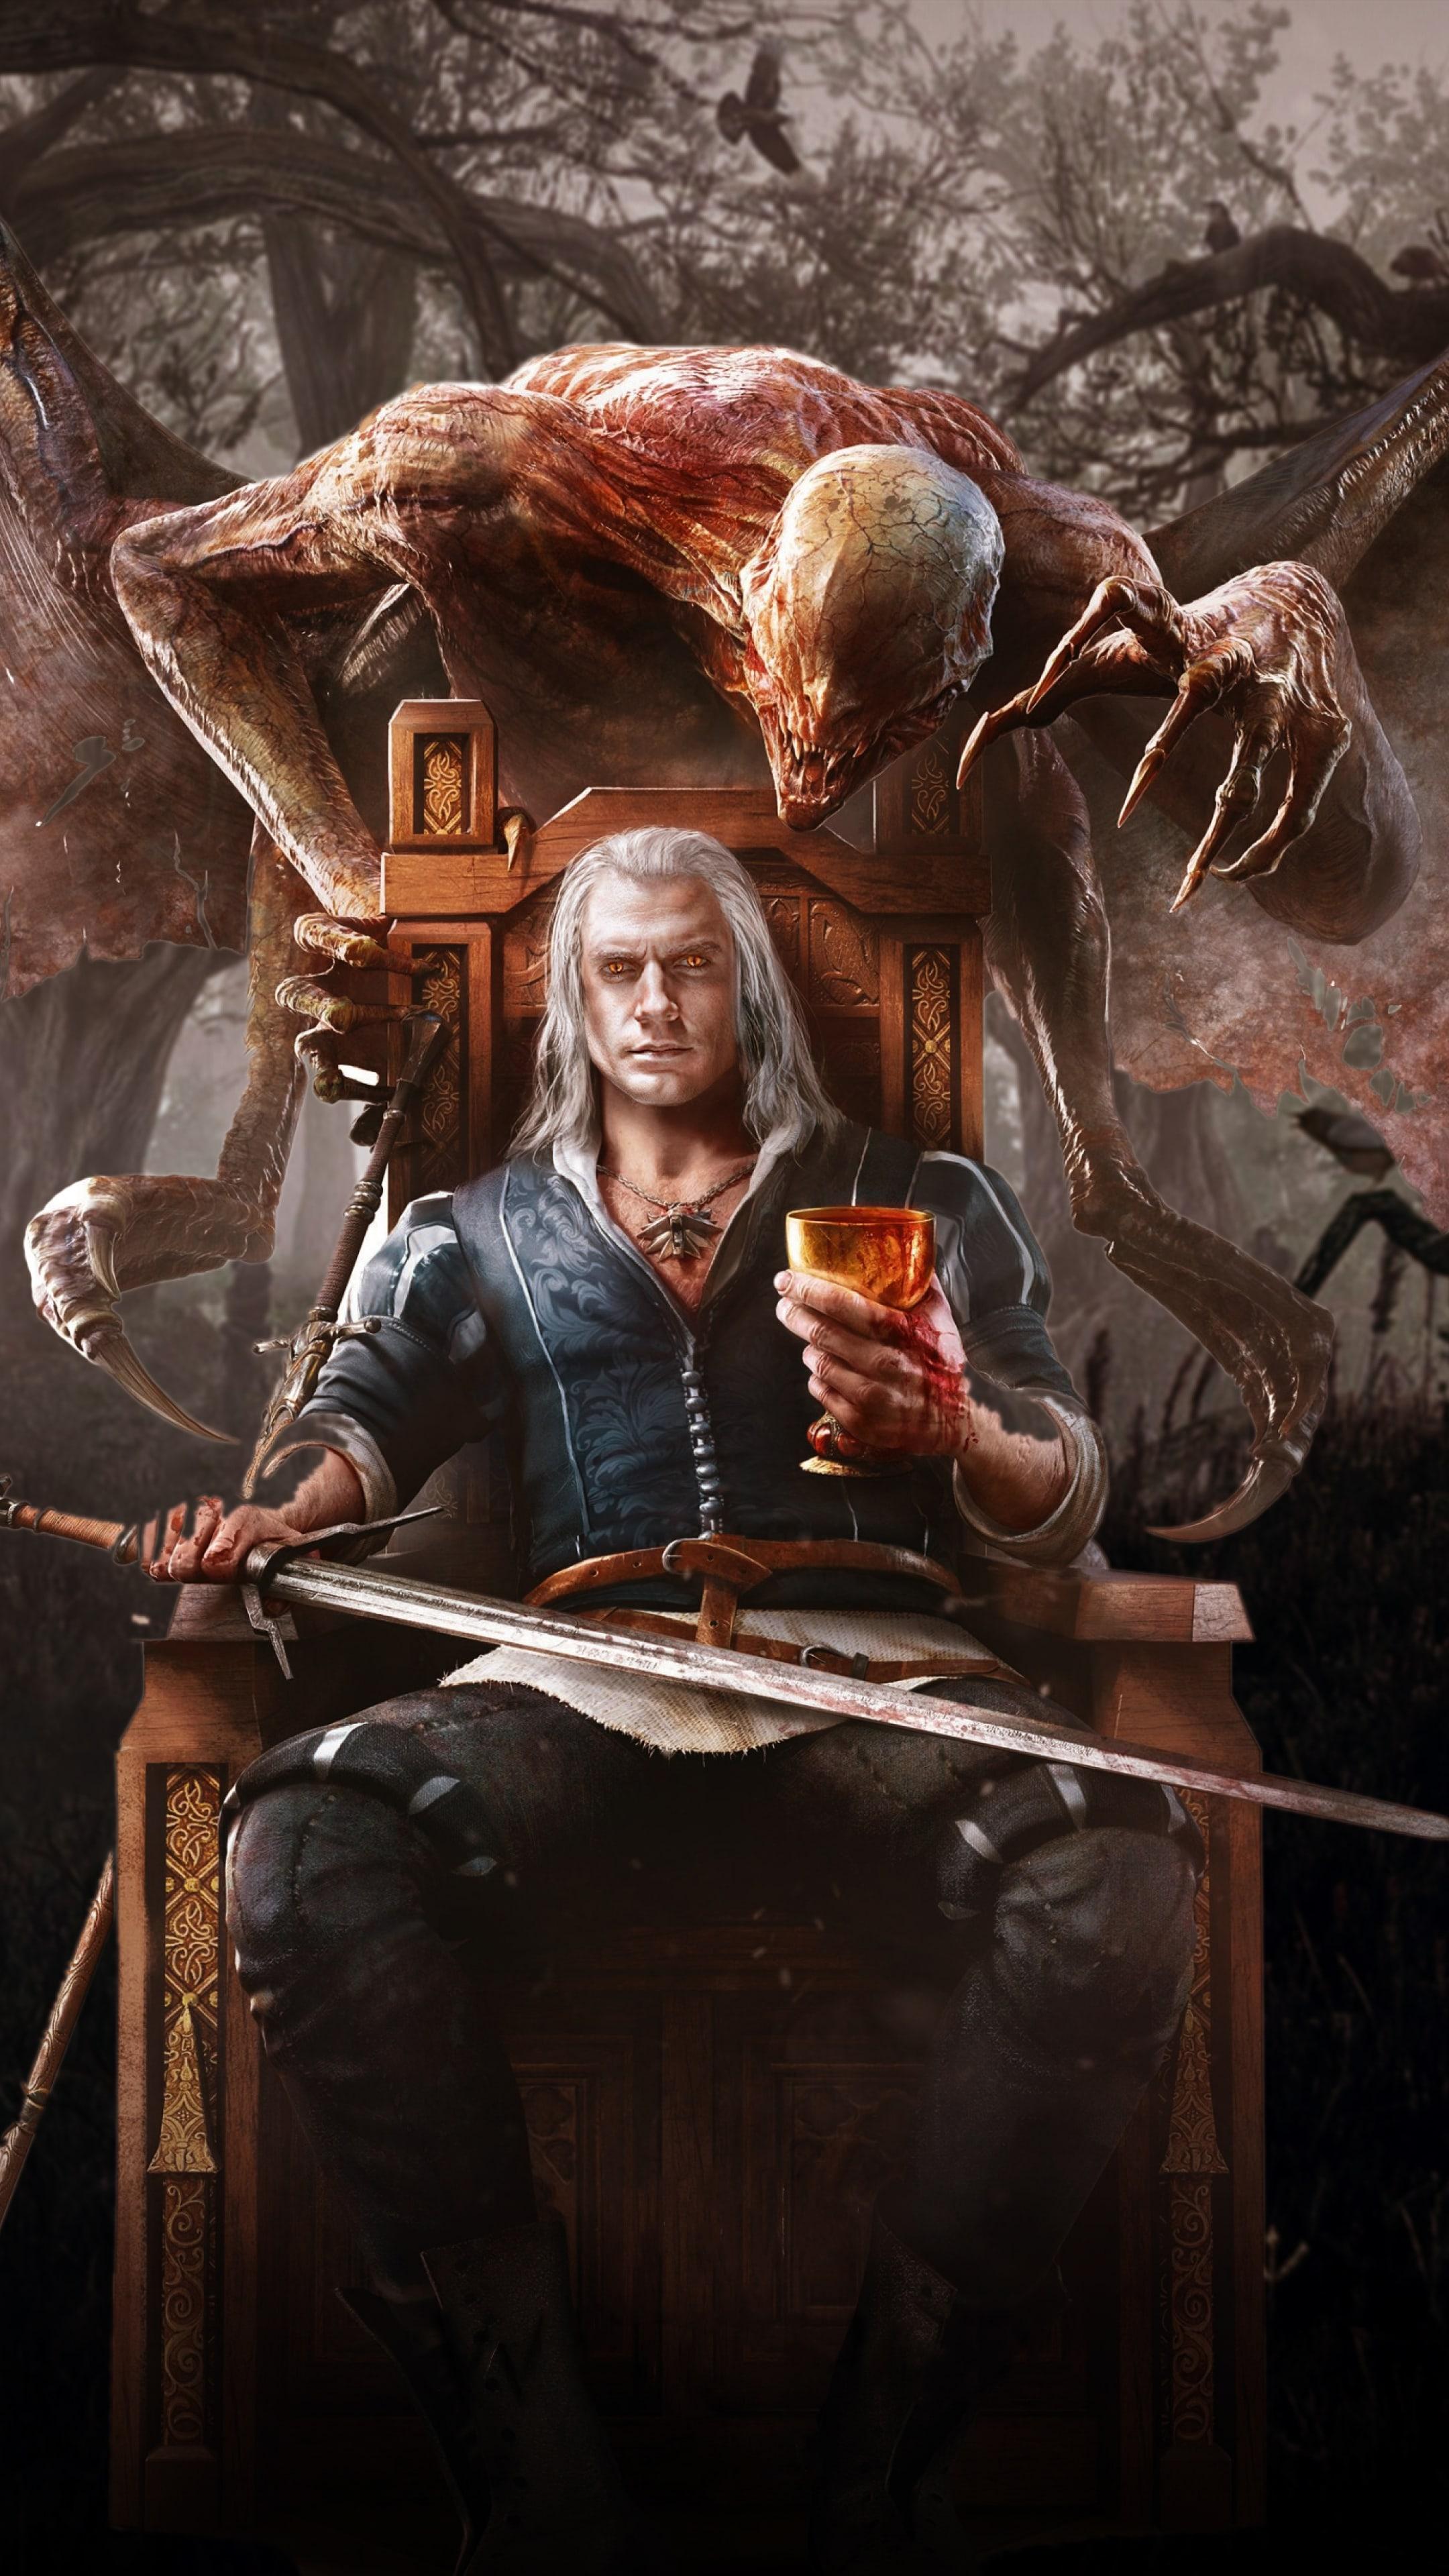 The Witcher wallpaper for phones, The Witcher wallpaper for phones